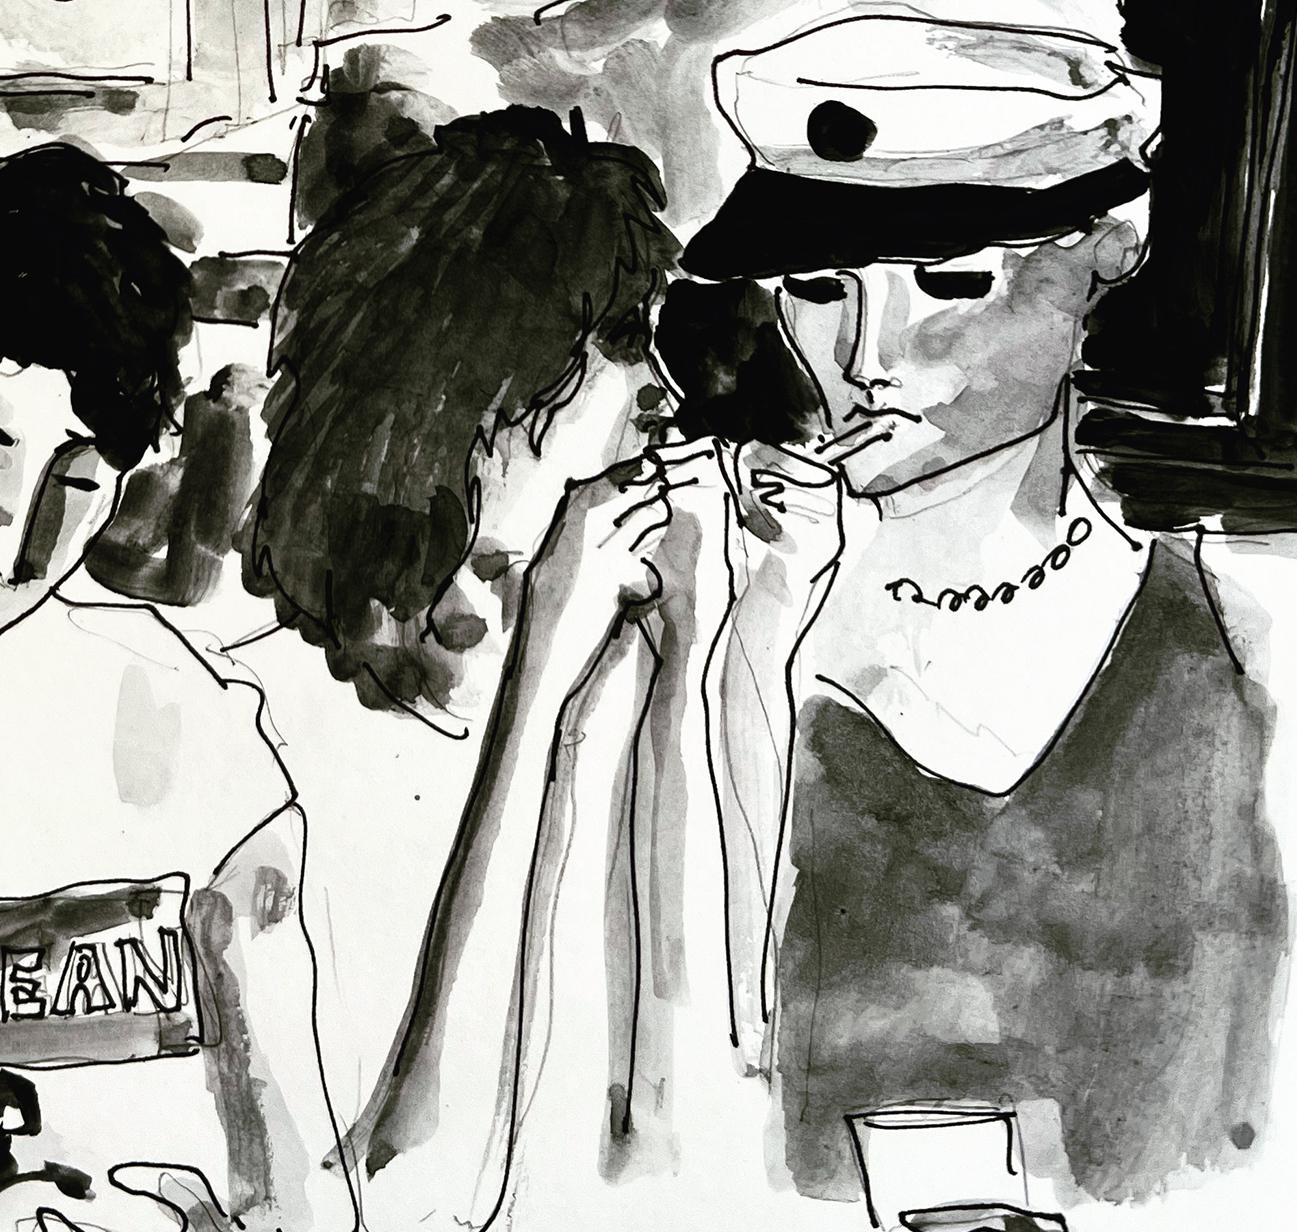 Oxford all night party 1983 (after a picture by Dafydd Jones), by Manuel Santelices
Ink and gouache on paper
Image size: 14 in. H x 11 in. W 
Unframed
2023

The worlds of fashion, society, and pop culture are explored through the illustrations of